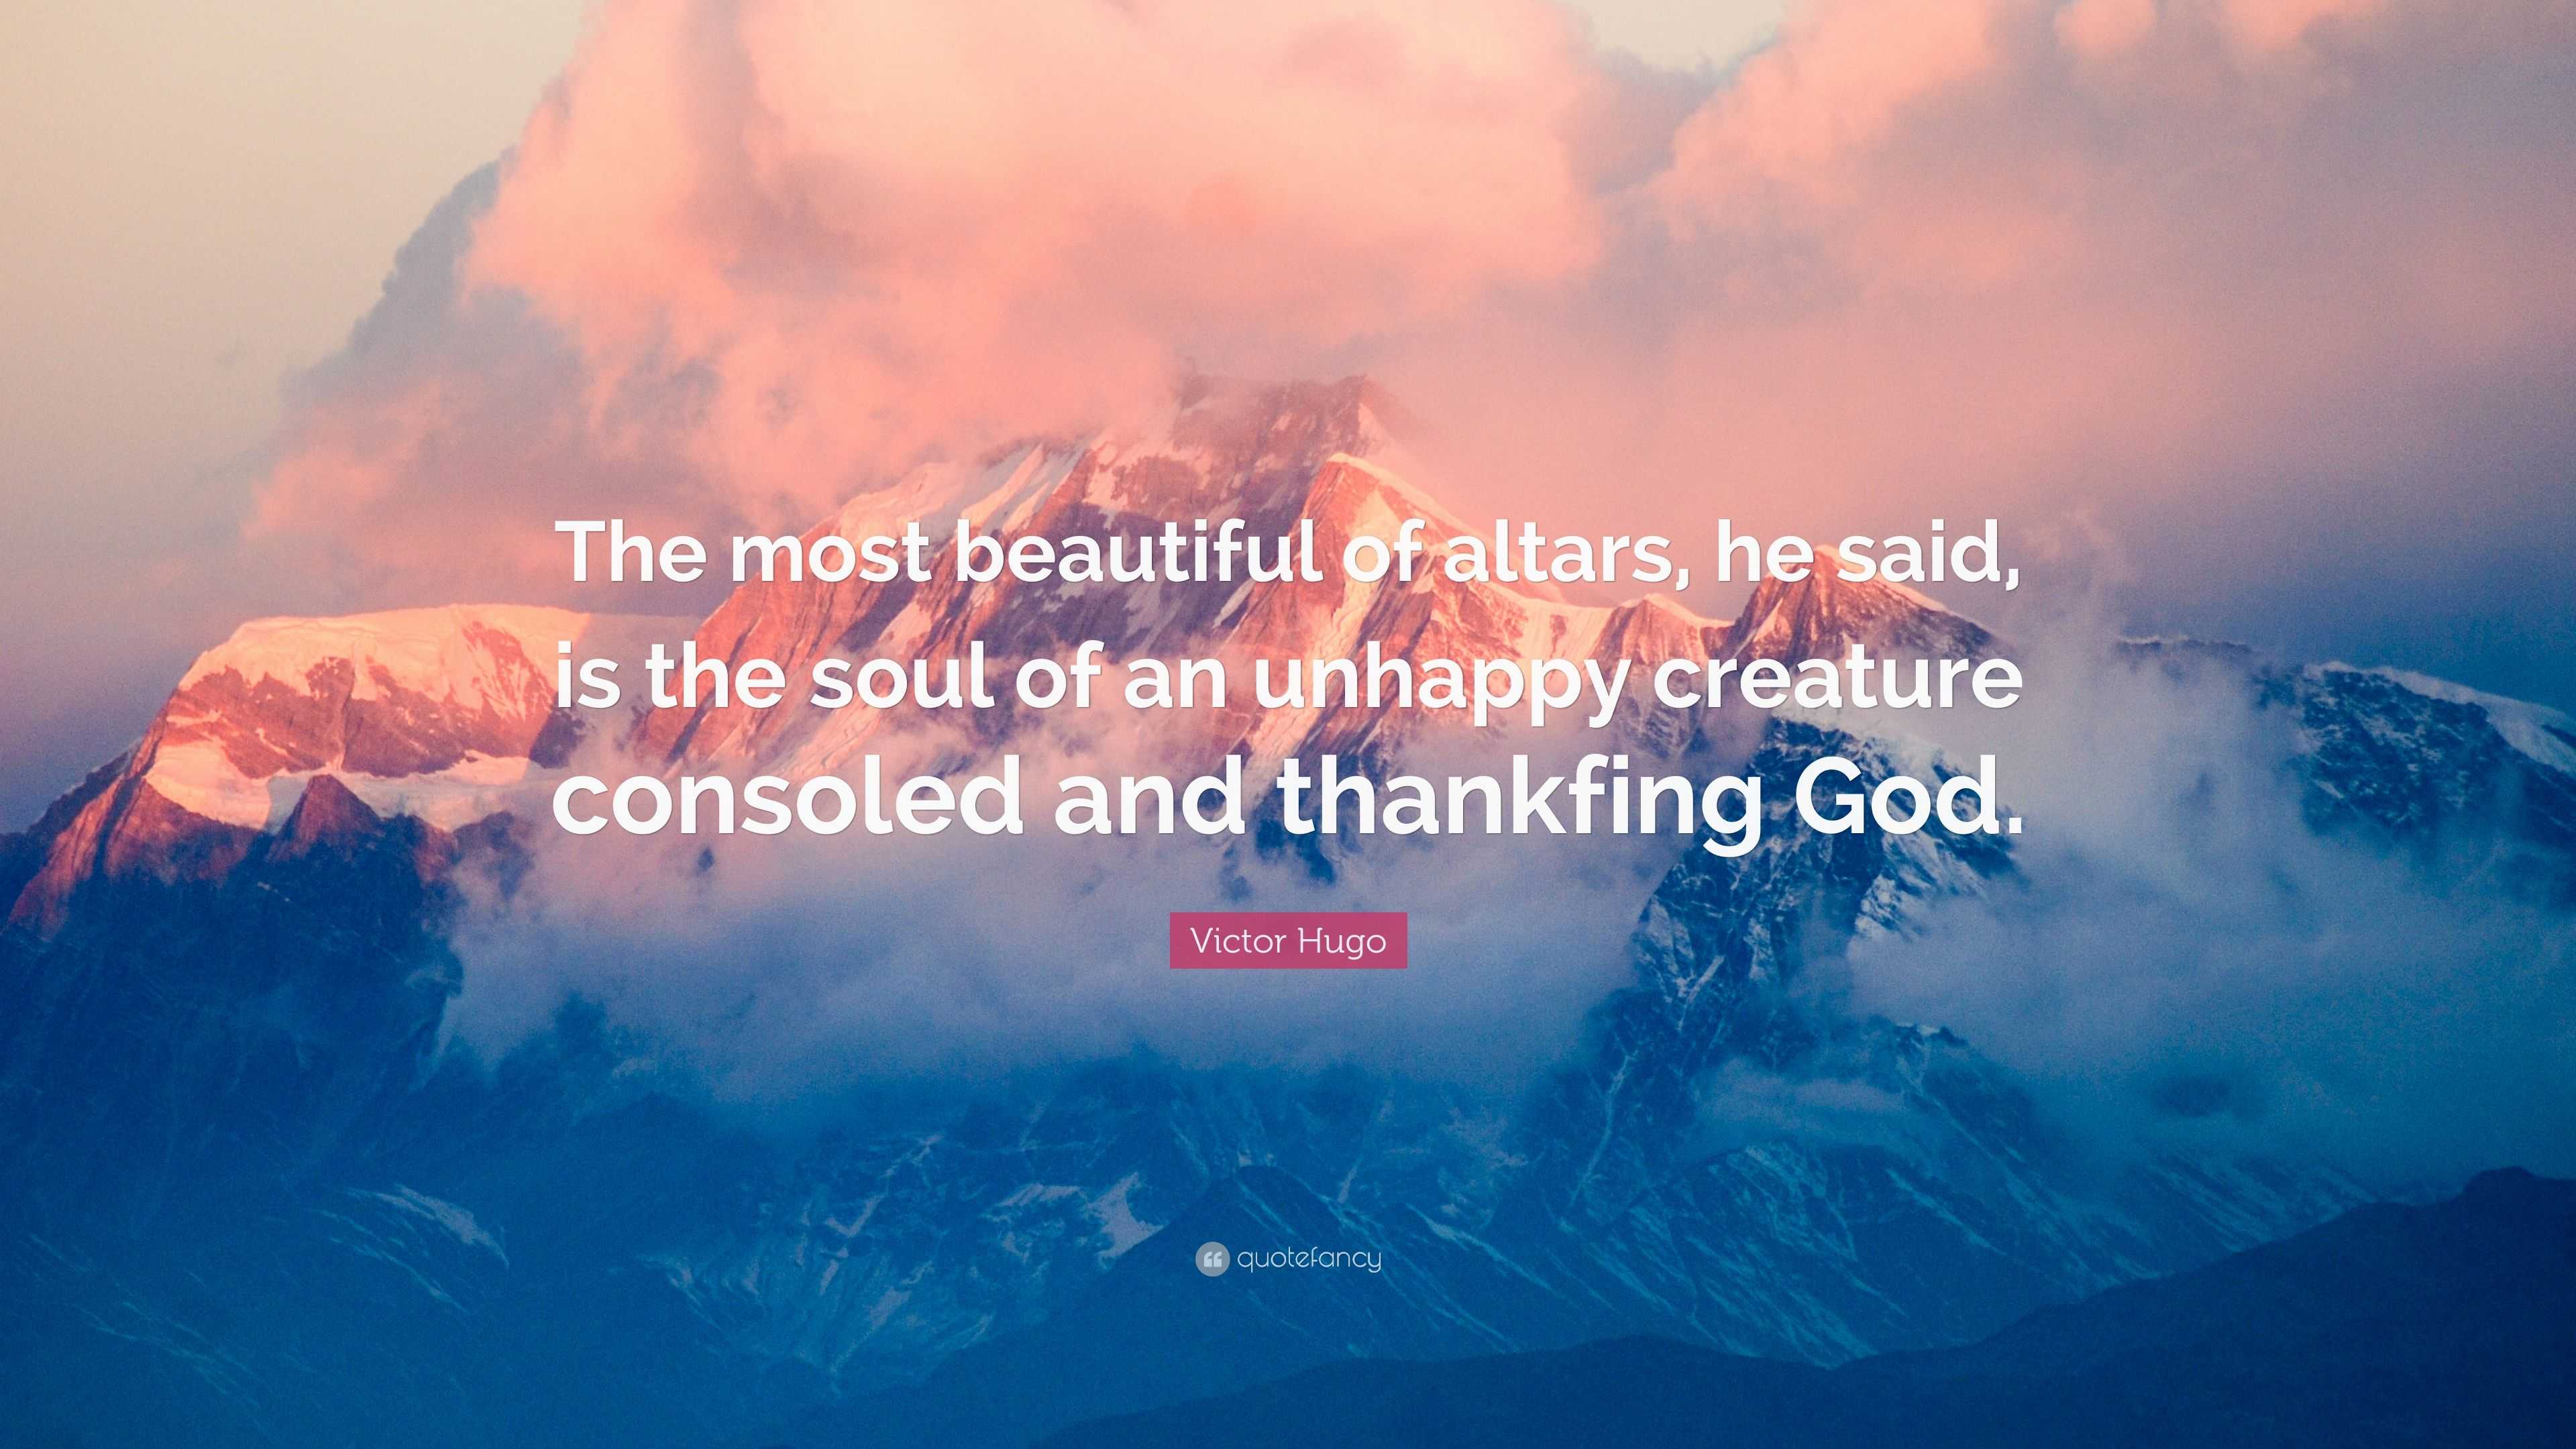 Victor Hugo Quote The Most Beautiful Of Altars He Said Is The Soul Of An Unhappy